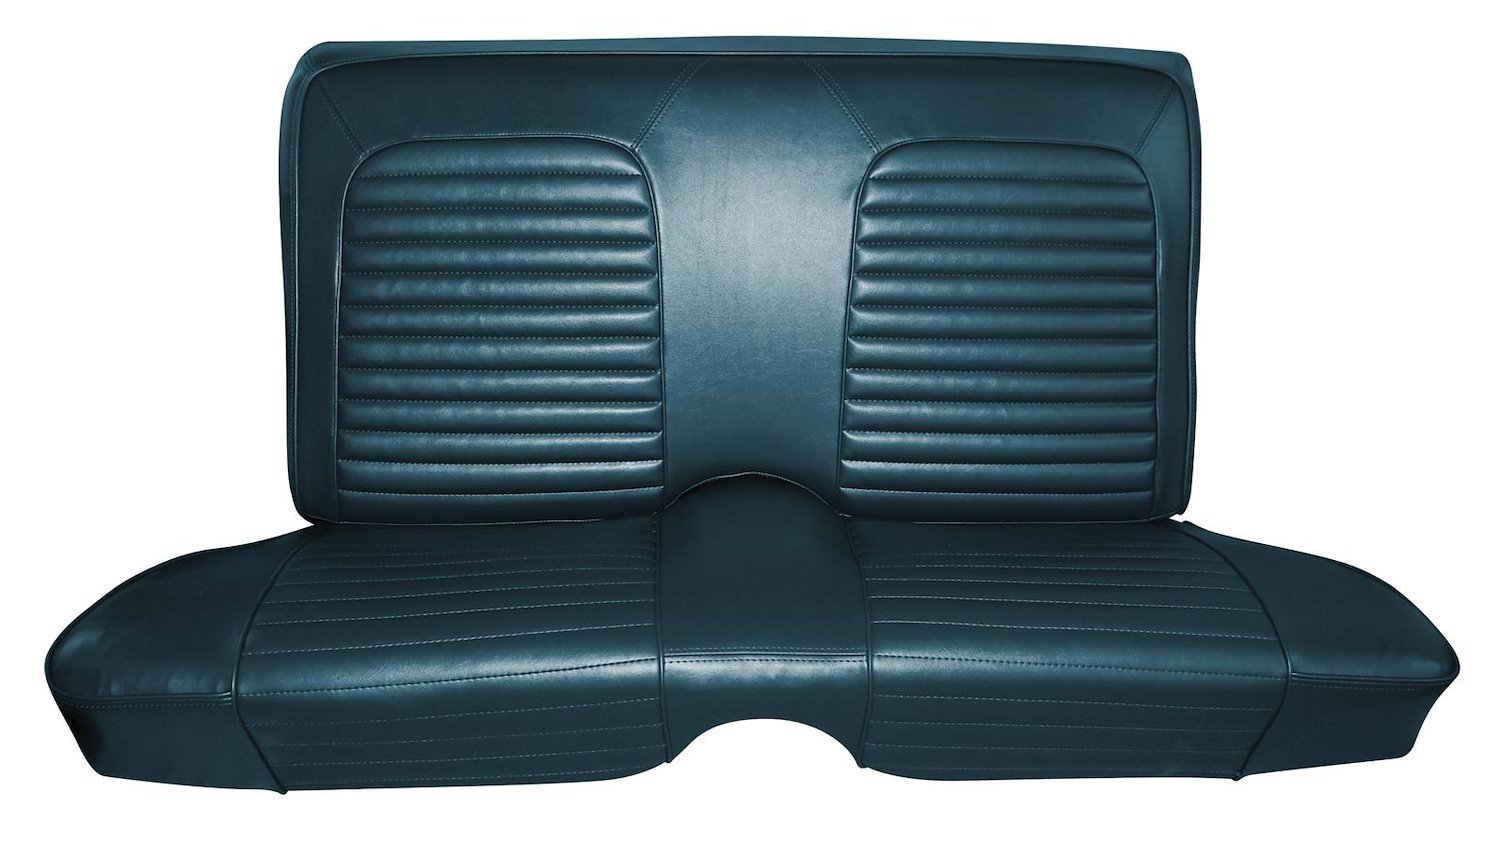 1971-72 Chevrolet Chevelle Malibu and Super Sport Convertible Interior Front Buckets and Rear Bench Seat Upholstery Set